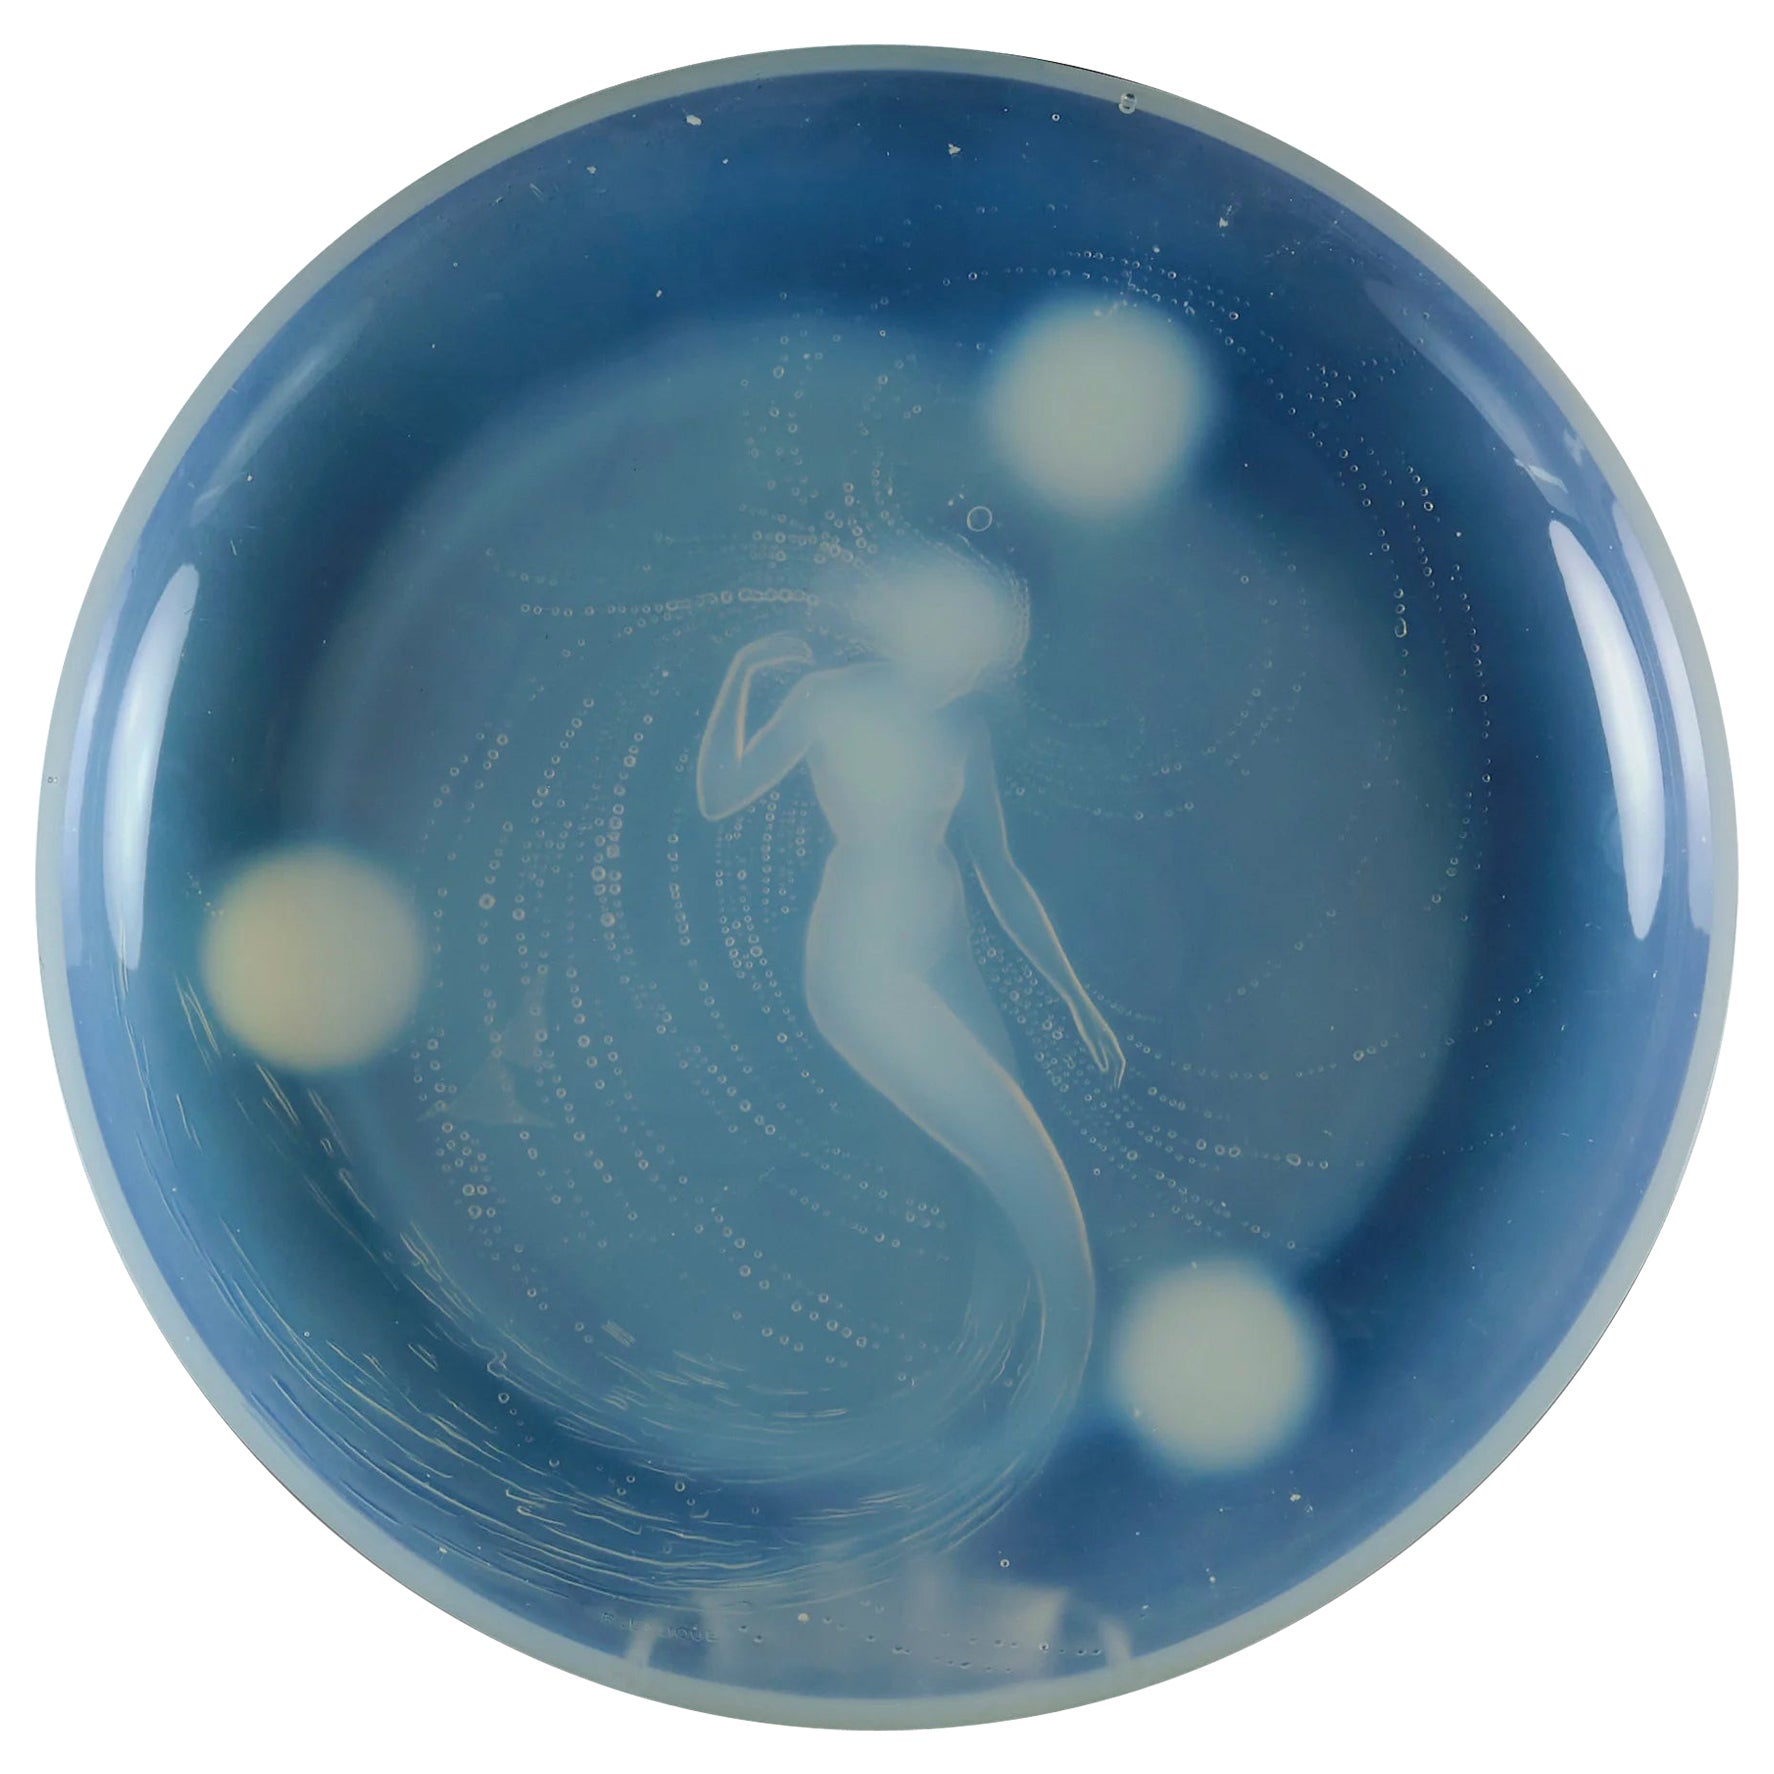 Early 20th Century Opalescent Salver Entitled “Sirène” by René Lalique